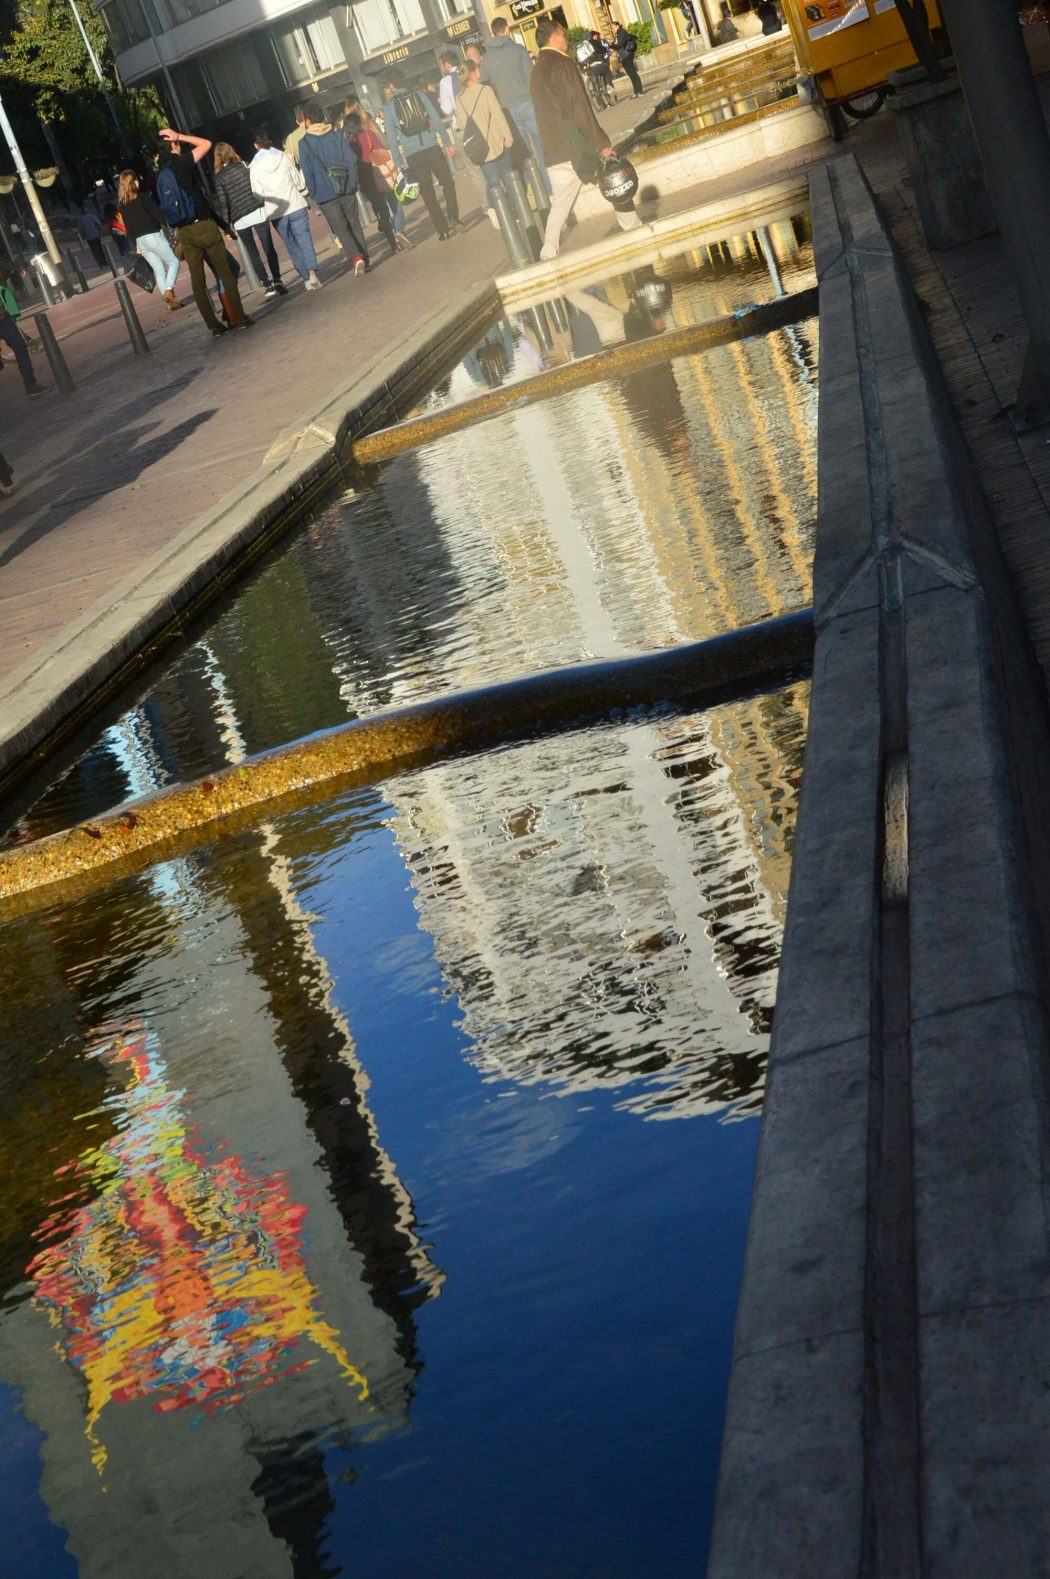 White building and street art reflected in water bogota